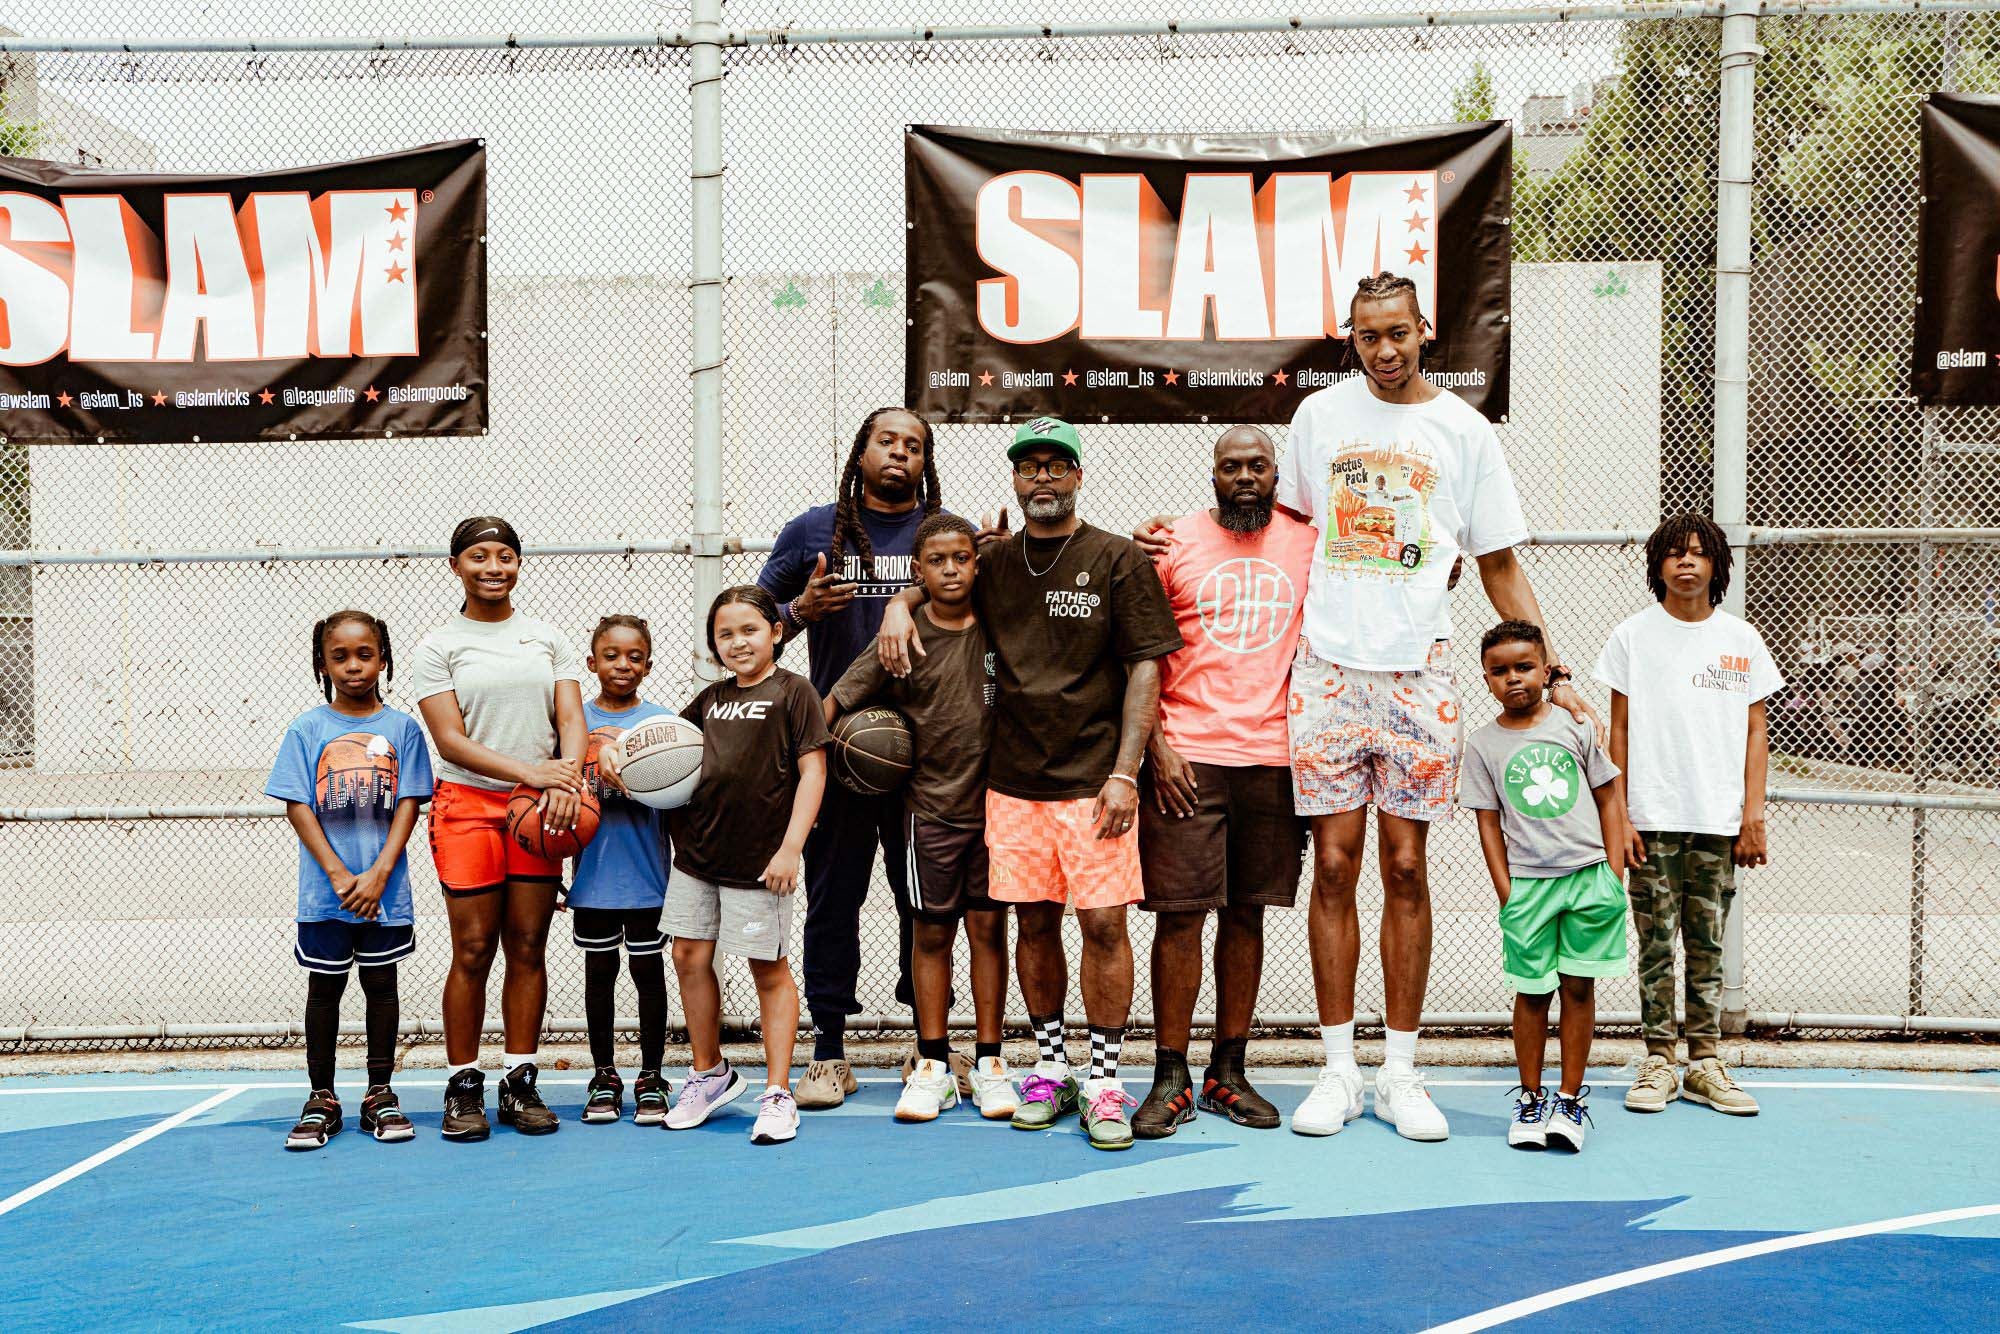 A group shot of the dads and their kids on the court